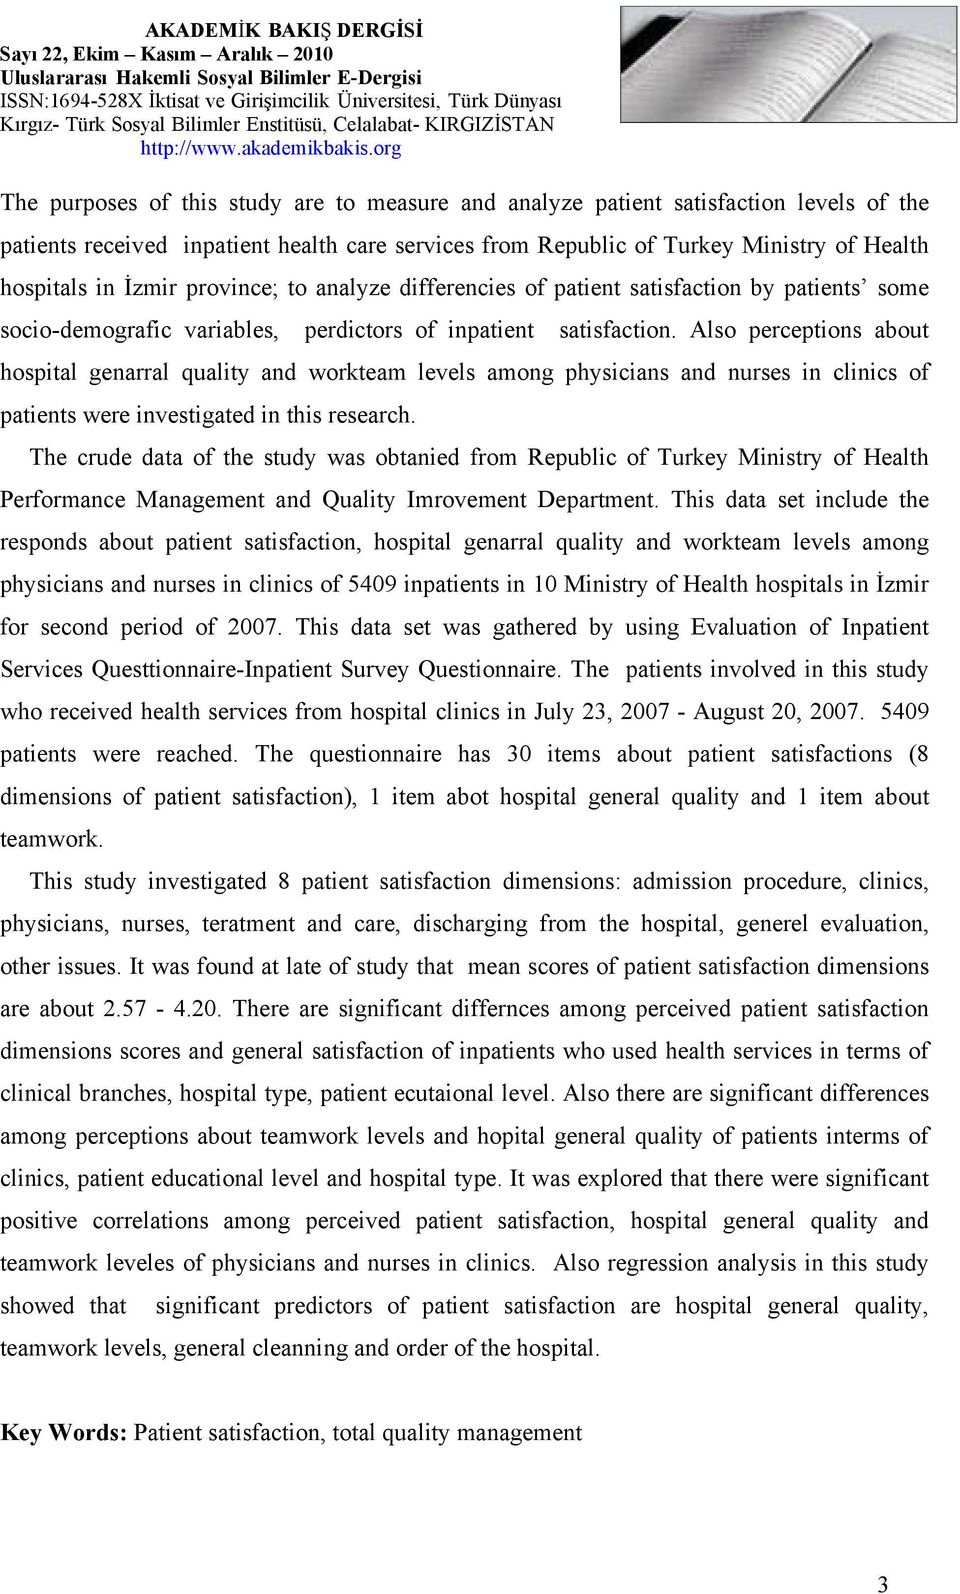 Also perceptions about hospital genarral quality and workteam levels among physicians and nurses in clinics of patients were investigated in this research.